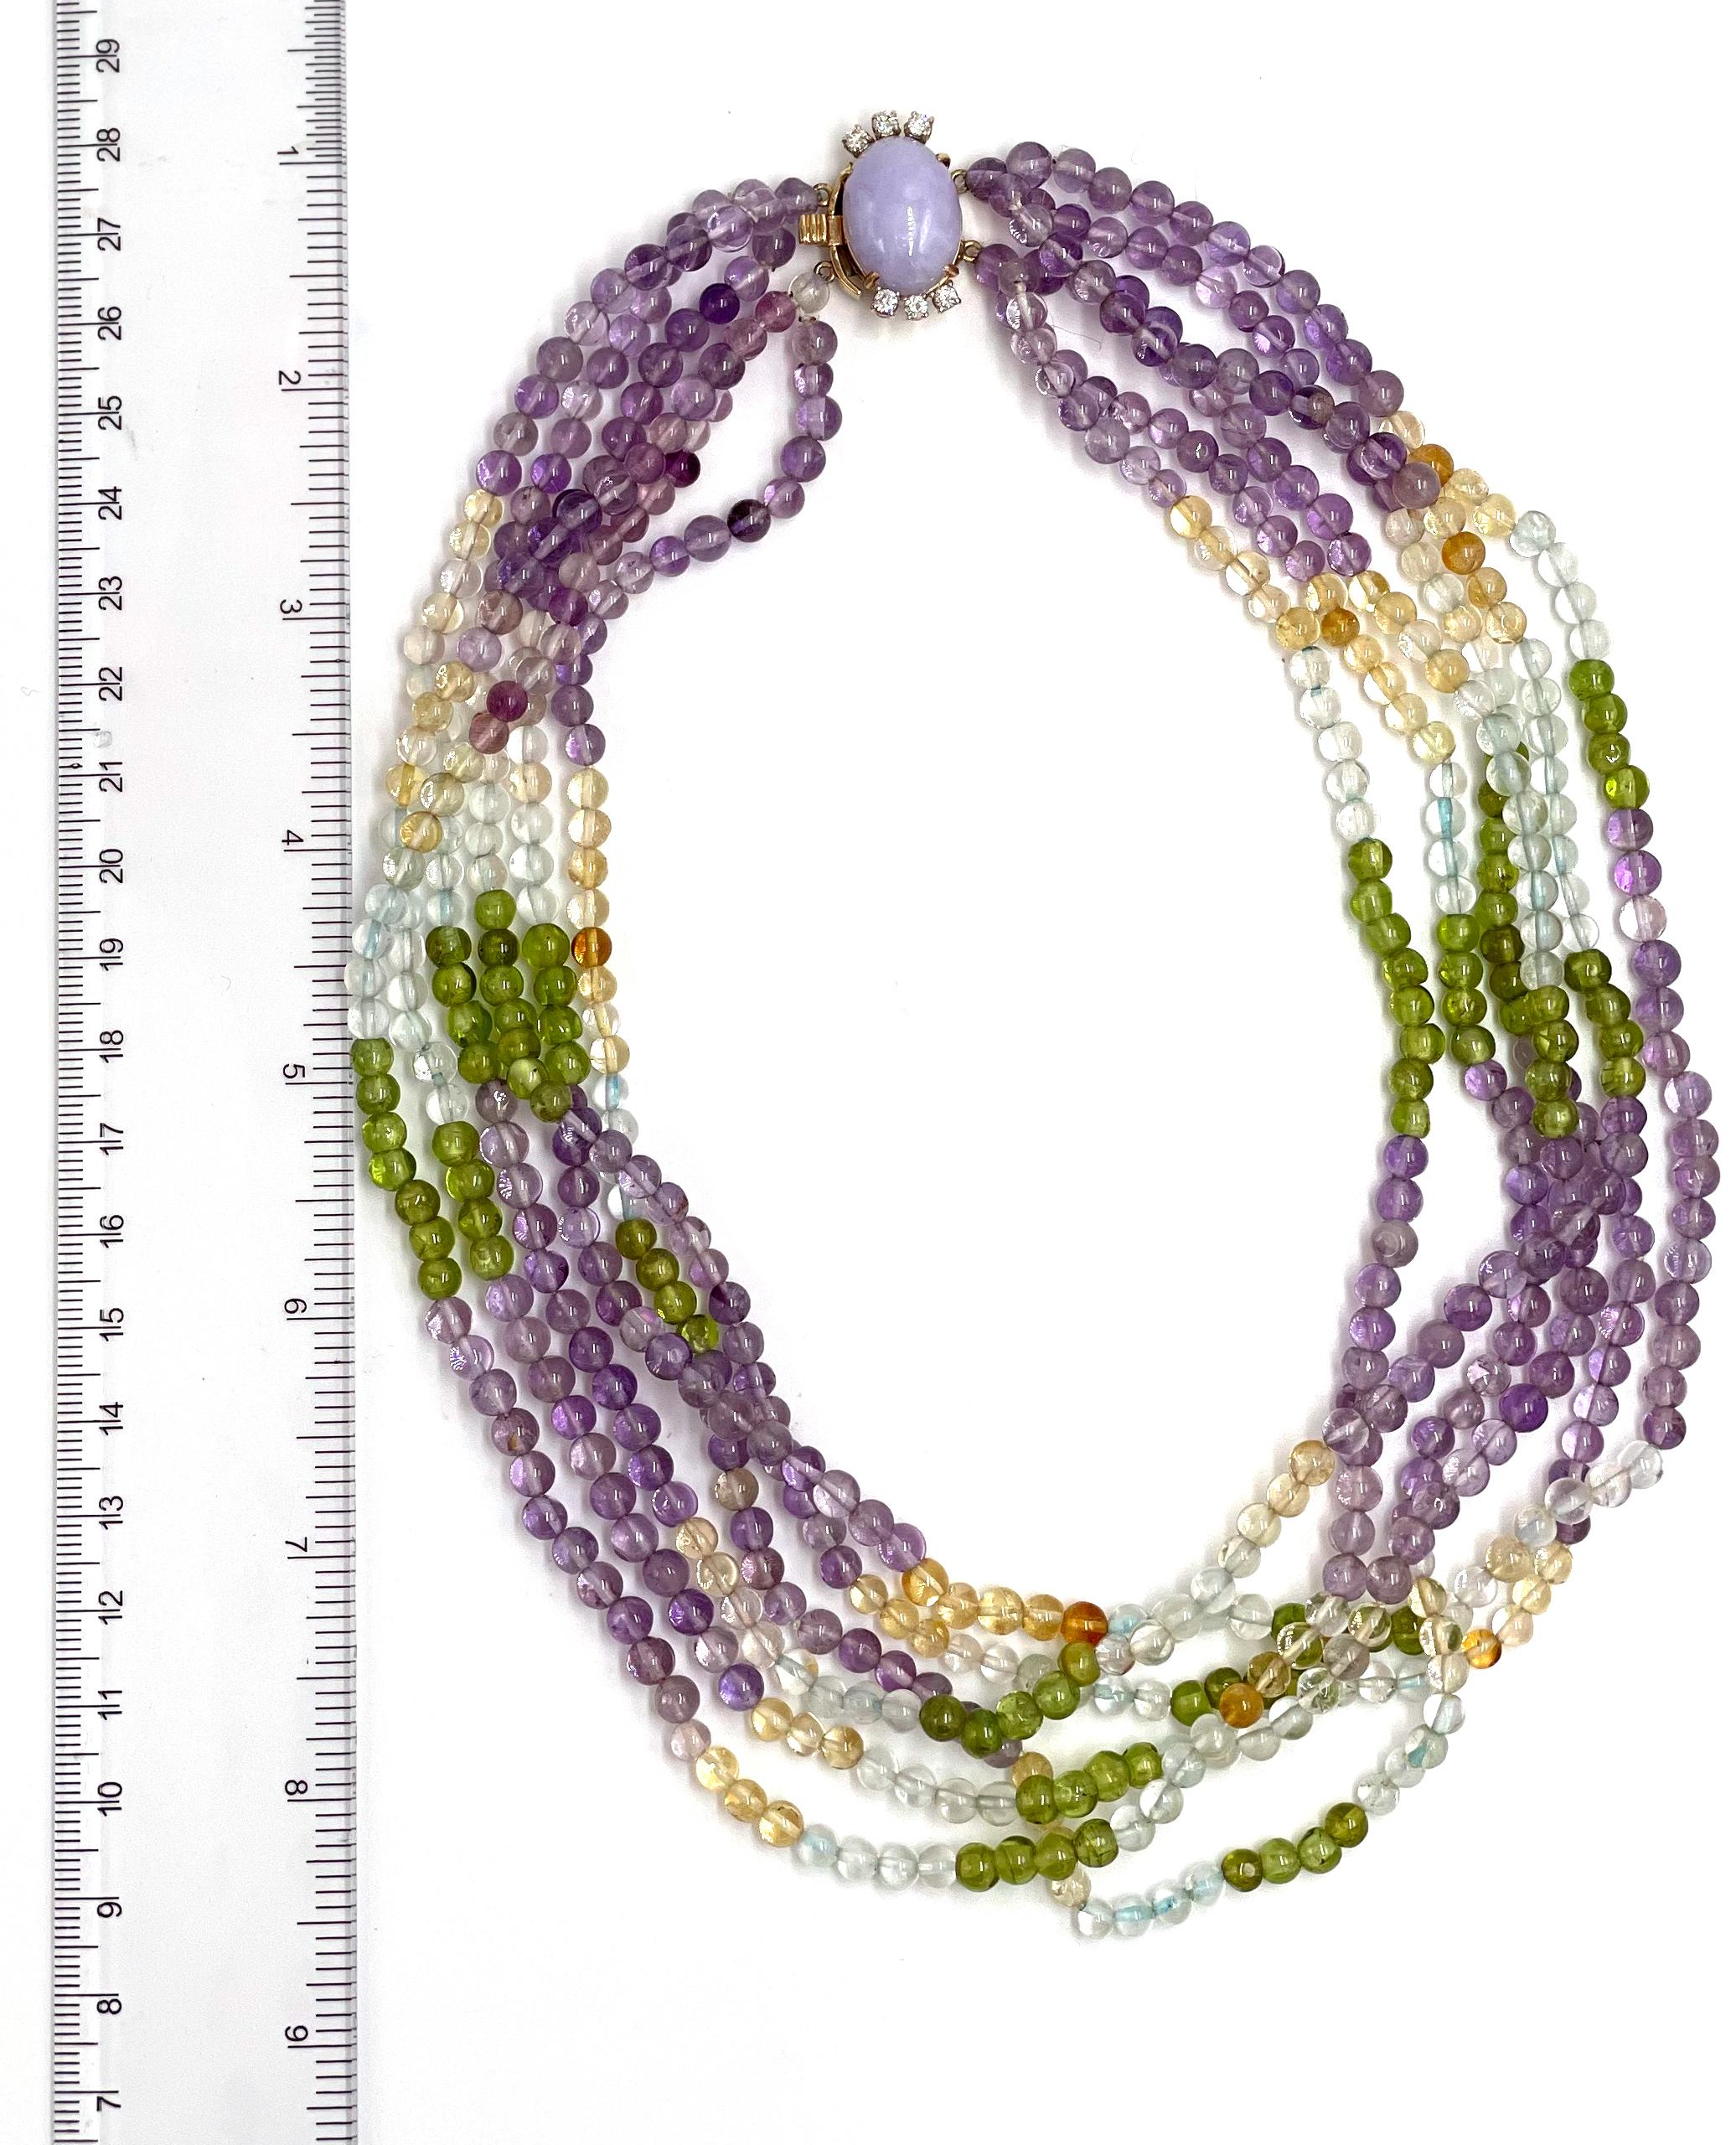 Pre owned vintage estate multi strand necklace consisting of 4.5-5mm beads made of amethyst, citrine, clear quartz and peridot.  The clasp is 14K white and yellow gold with one lavender jade measuring 17.5X13.0X7.8mm and six round brilliant-cut